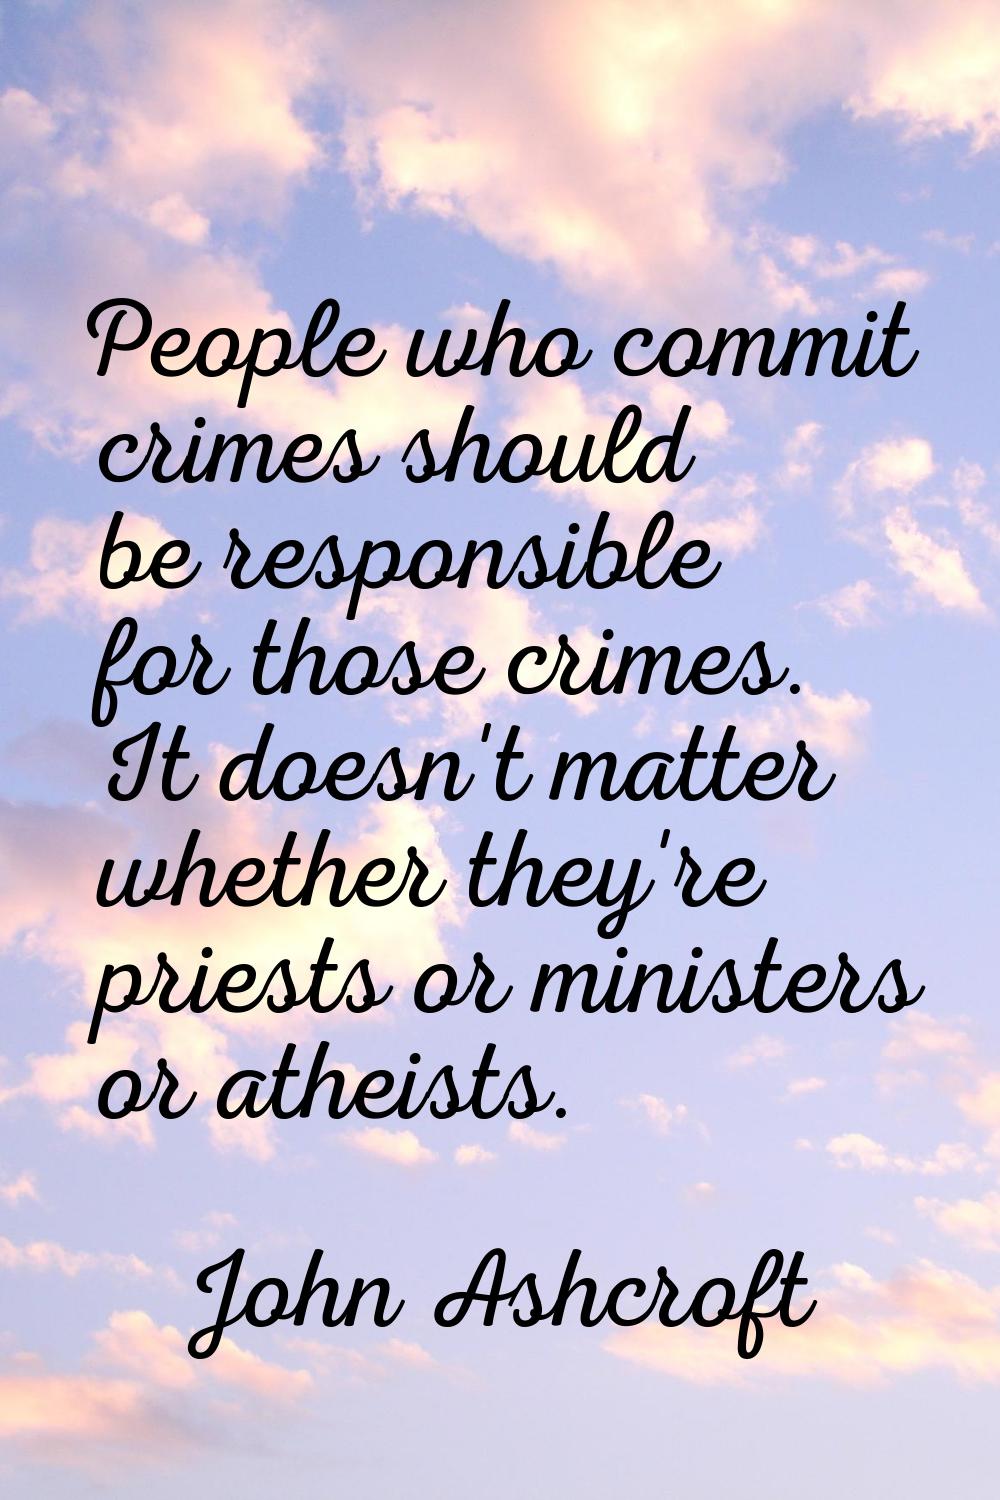 People who commit crimes should be responsible for those crimes. It doesn't matter whether they're 